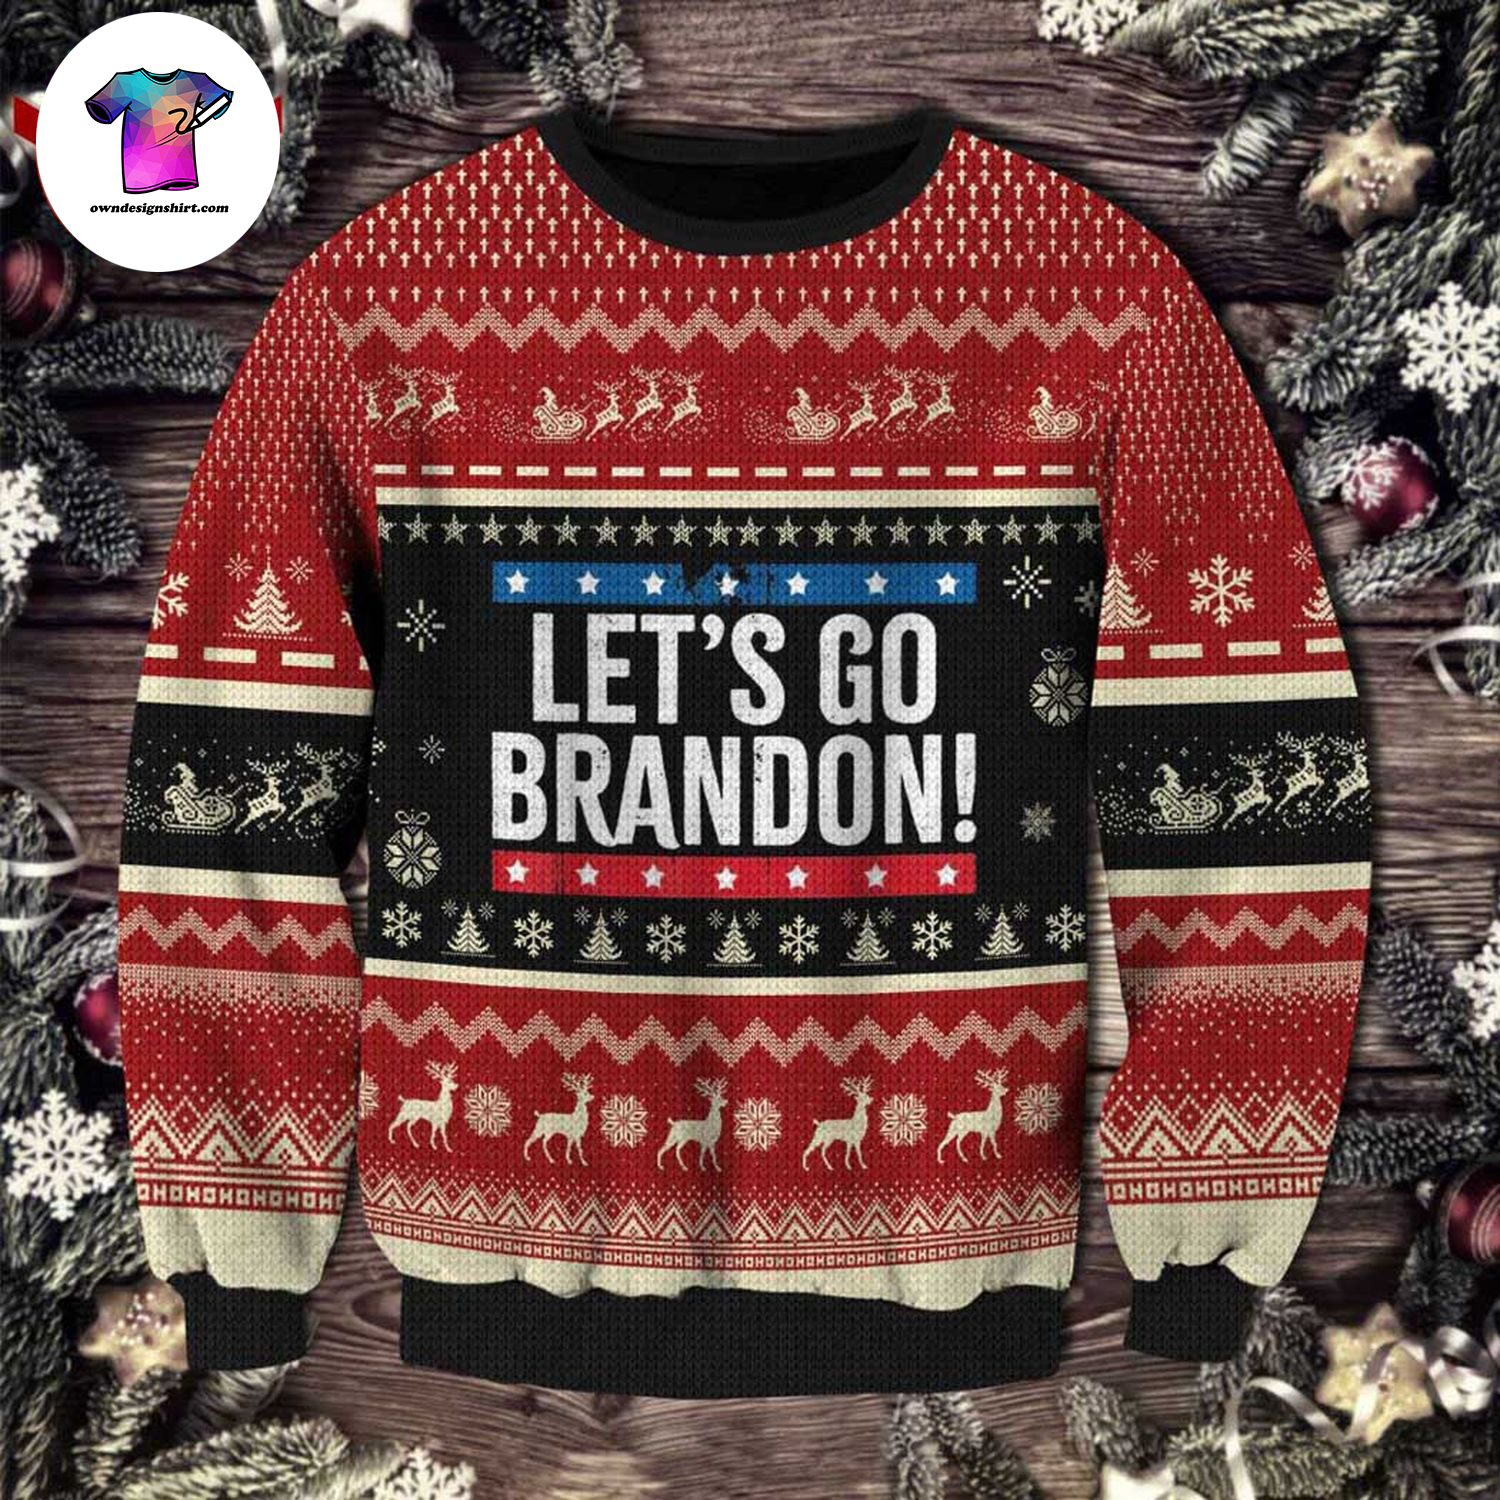 Let’s go brandon ugly christmas sweater - Copy (4)